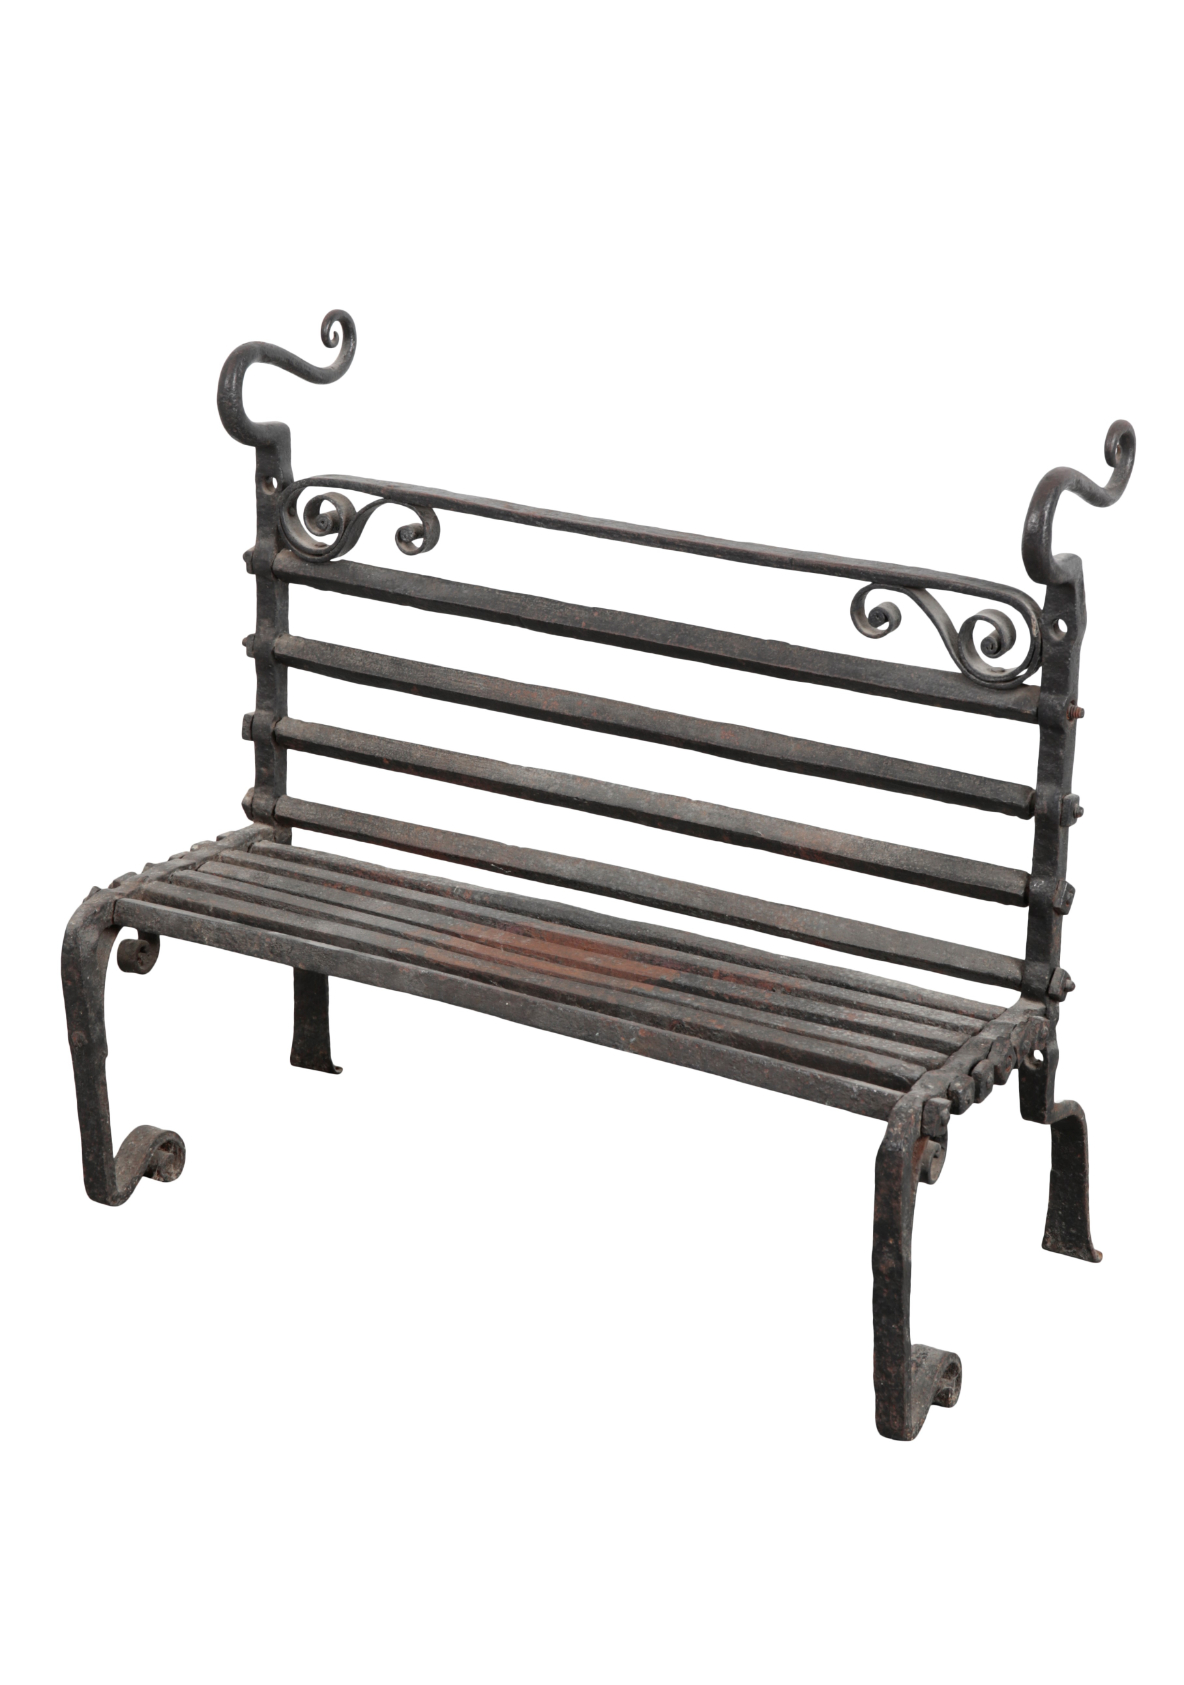 A WROUGHT IRON GRATE probably 19th 310b0e